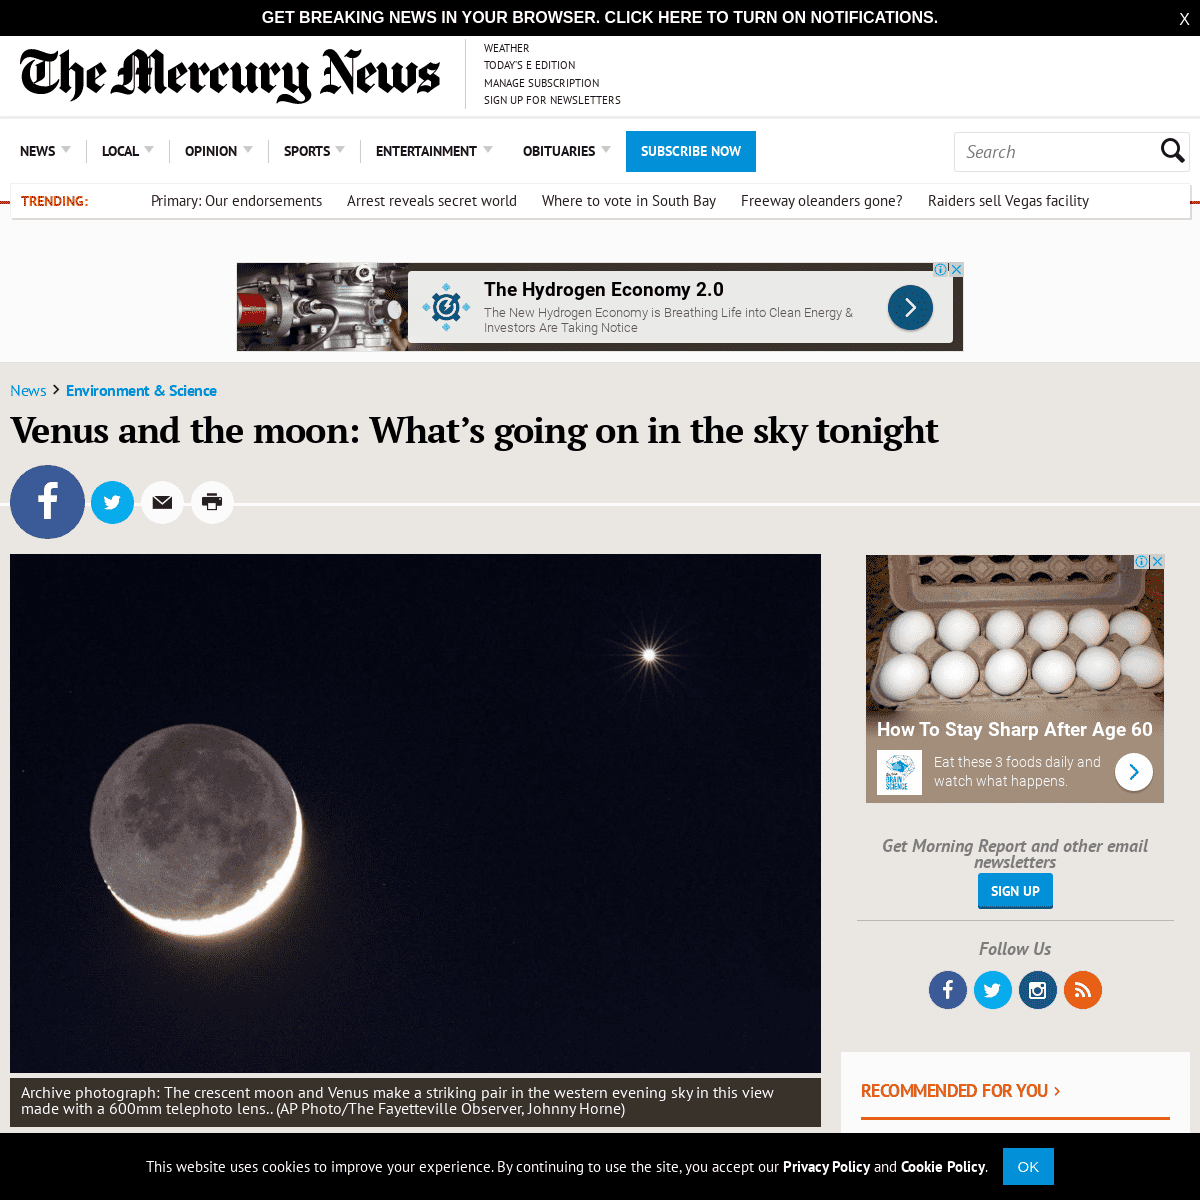 A complete backup of www.mercurynews.com/venus-and-the-moon-whats-going-on-in-the-sky-tonight